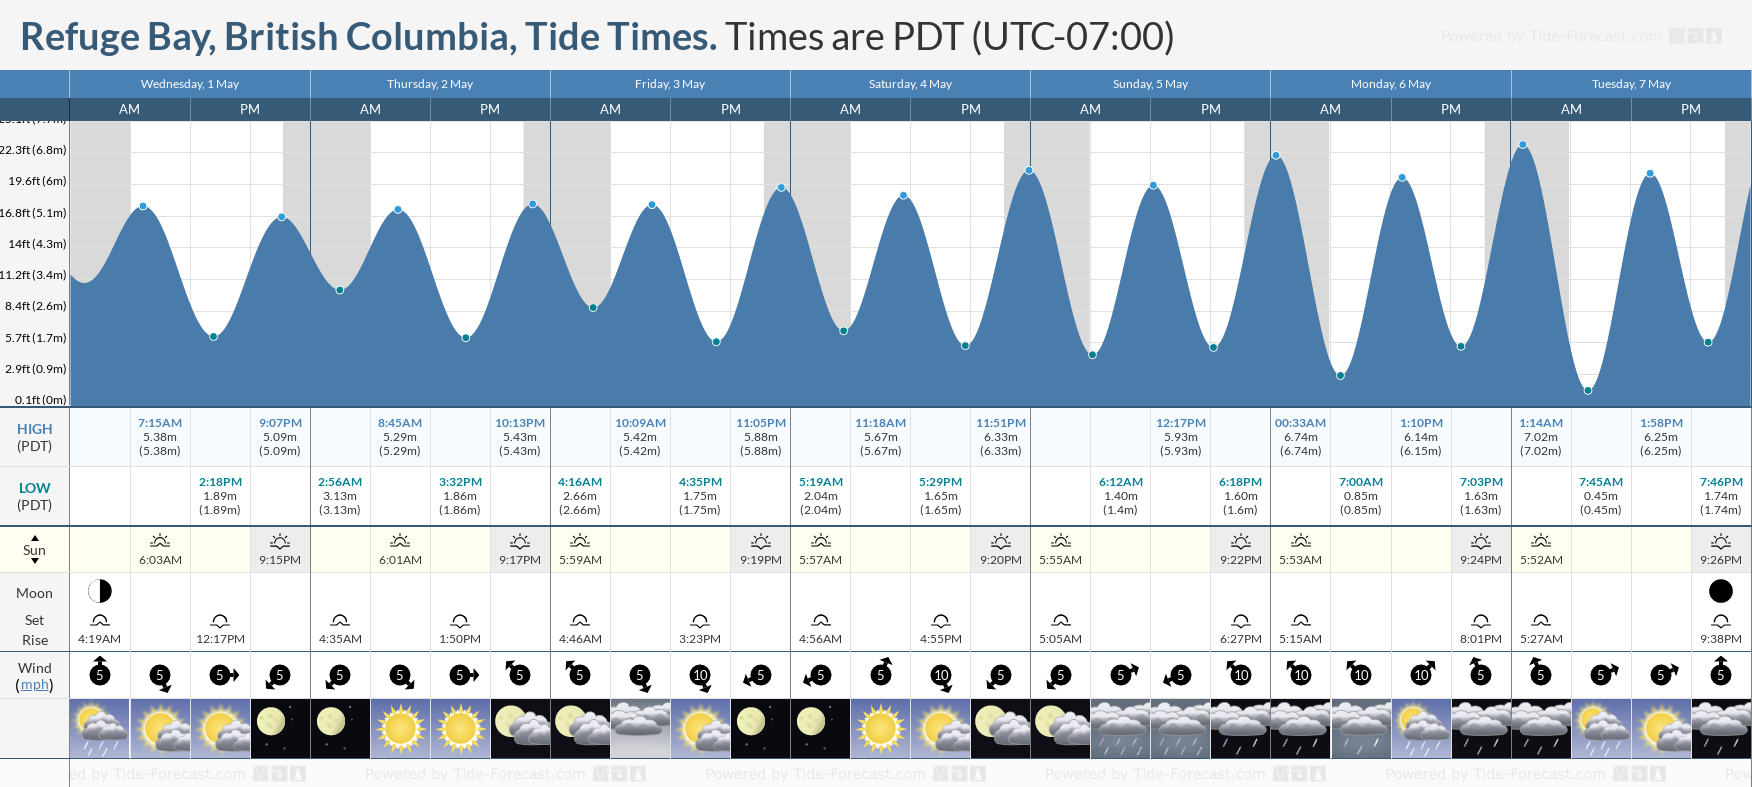 Refuge Bay, British Columbia Tide Chart including high and low tide tide times for the next 7 days